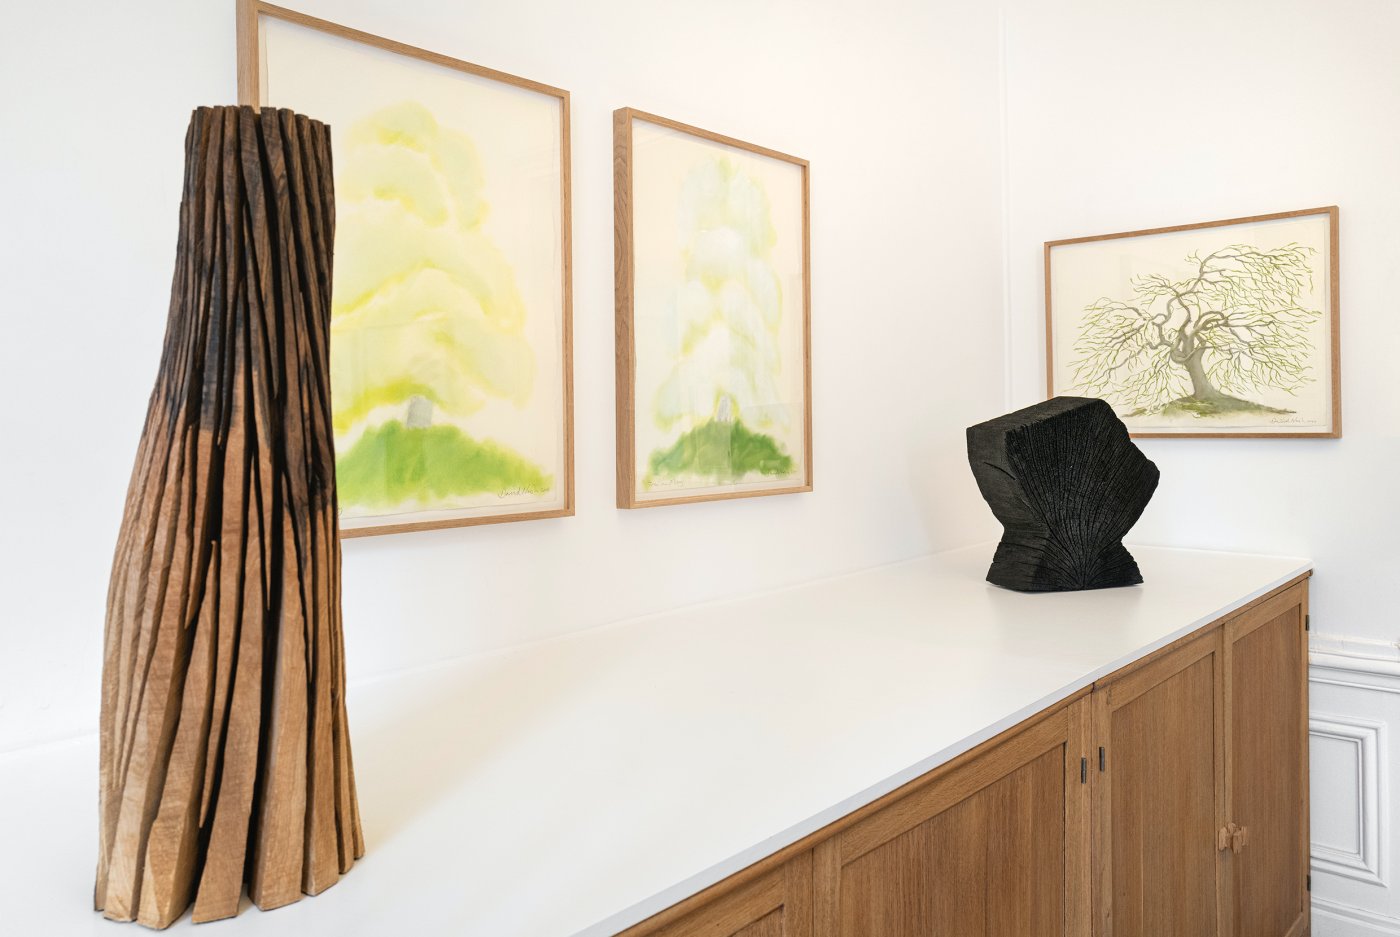 Installation image for David Nash: The Many Voices of the Trees, at Galerie Lelong & Co.